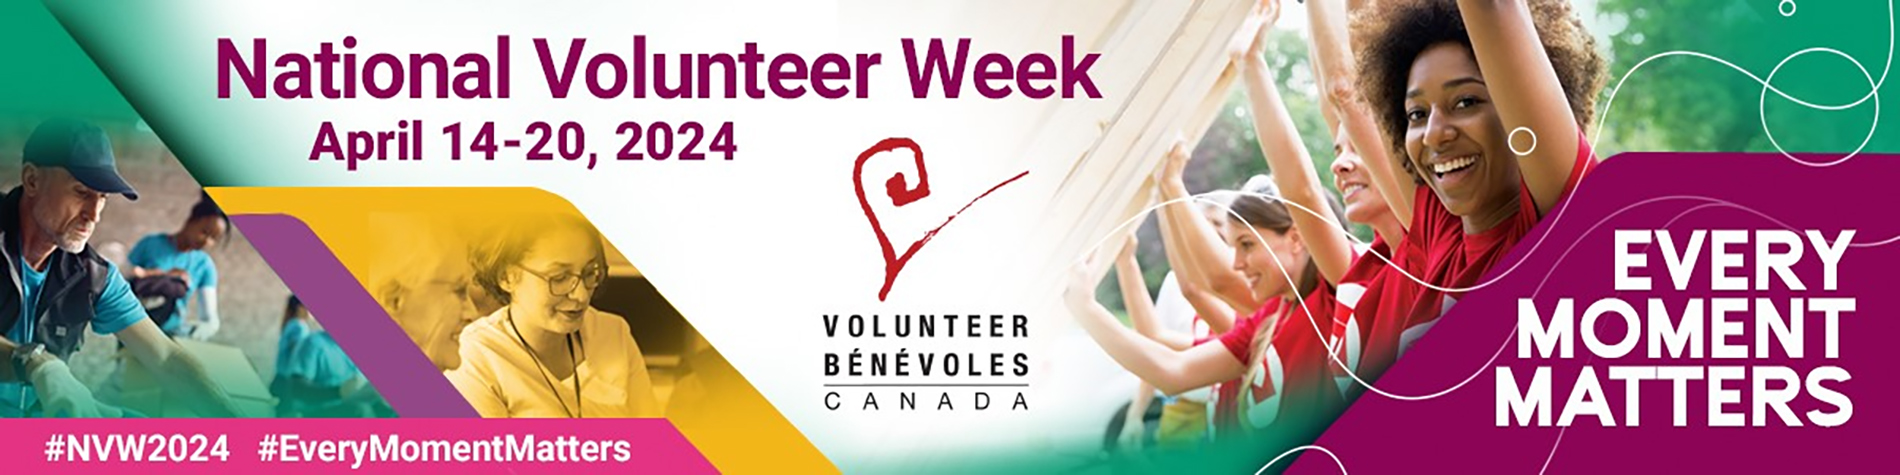 <p class="slider-title">Thank You | Three Cheers for CBE Volunteers</p><div class="banner-line"></div><p class="slider-subtitle">The CBE extends our gratitude to all the incredible volunteers.</p> <a style="pointer-events:all" class=AEBannerMoreLink href="https://www.cbe.ab.ca/news-centre/Pages/thank-you-three-cheers-for-cbe-volunteers.aspx">Read More</a>